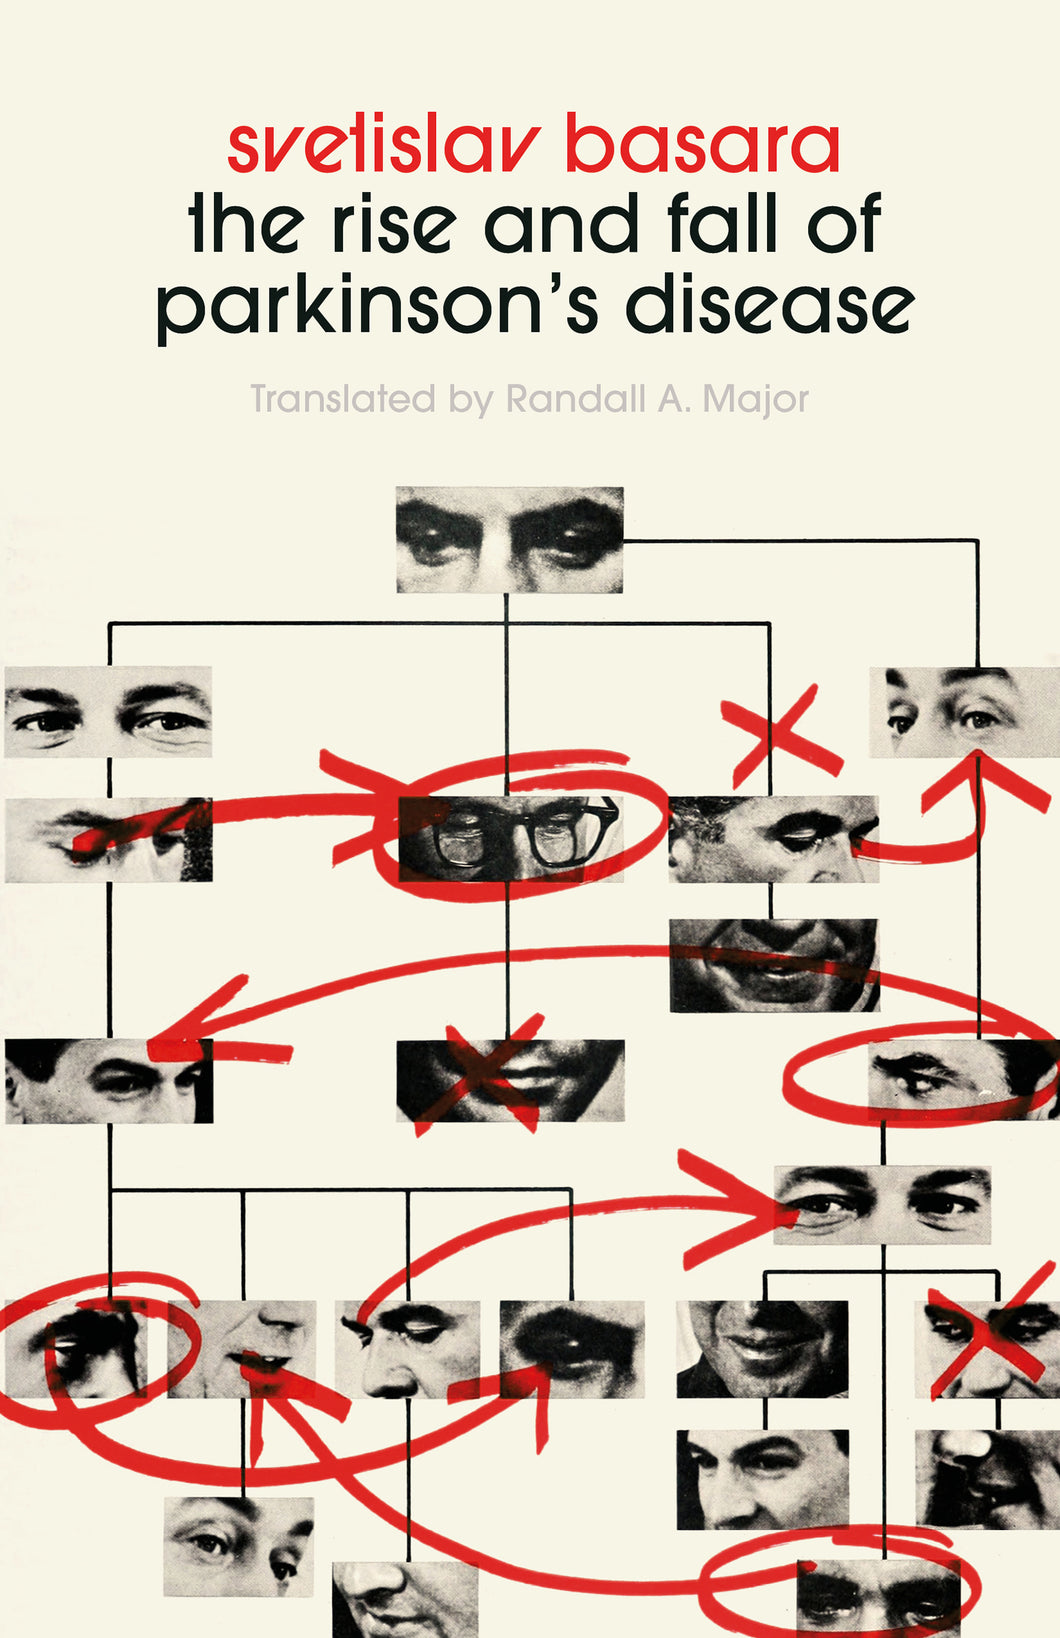 The Rise and Fall of Parkinson’s Disease